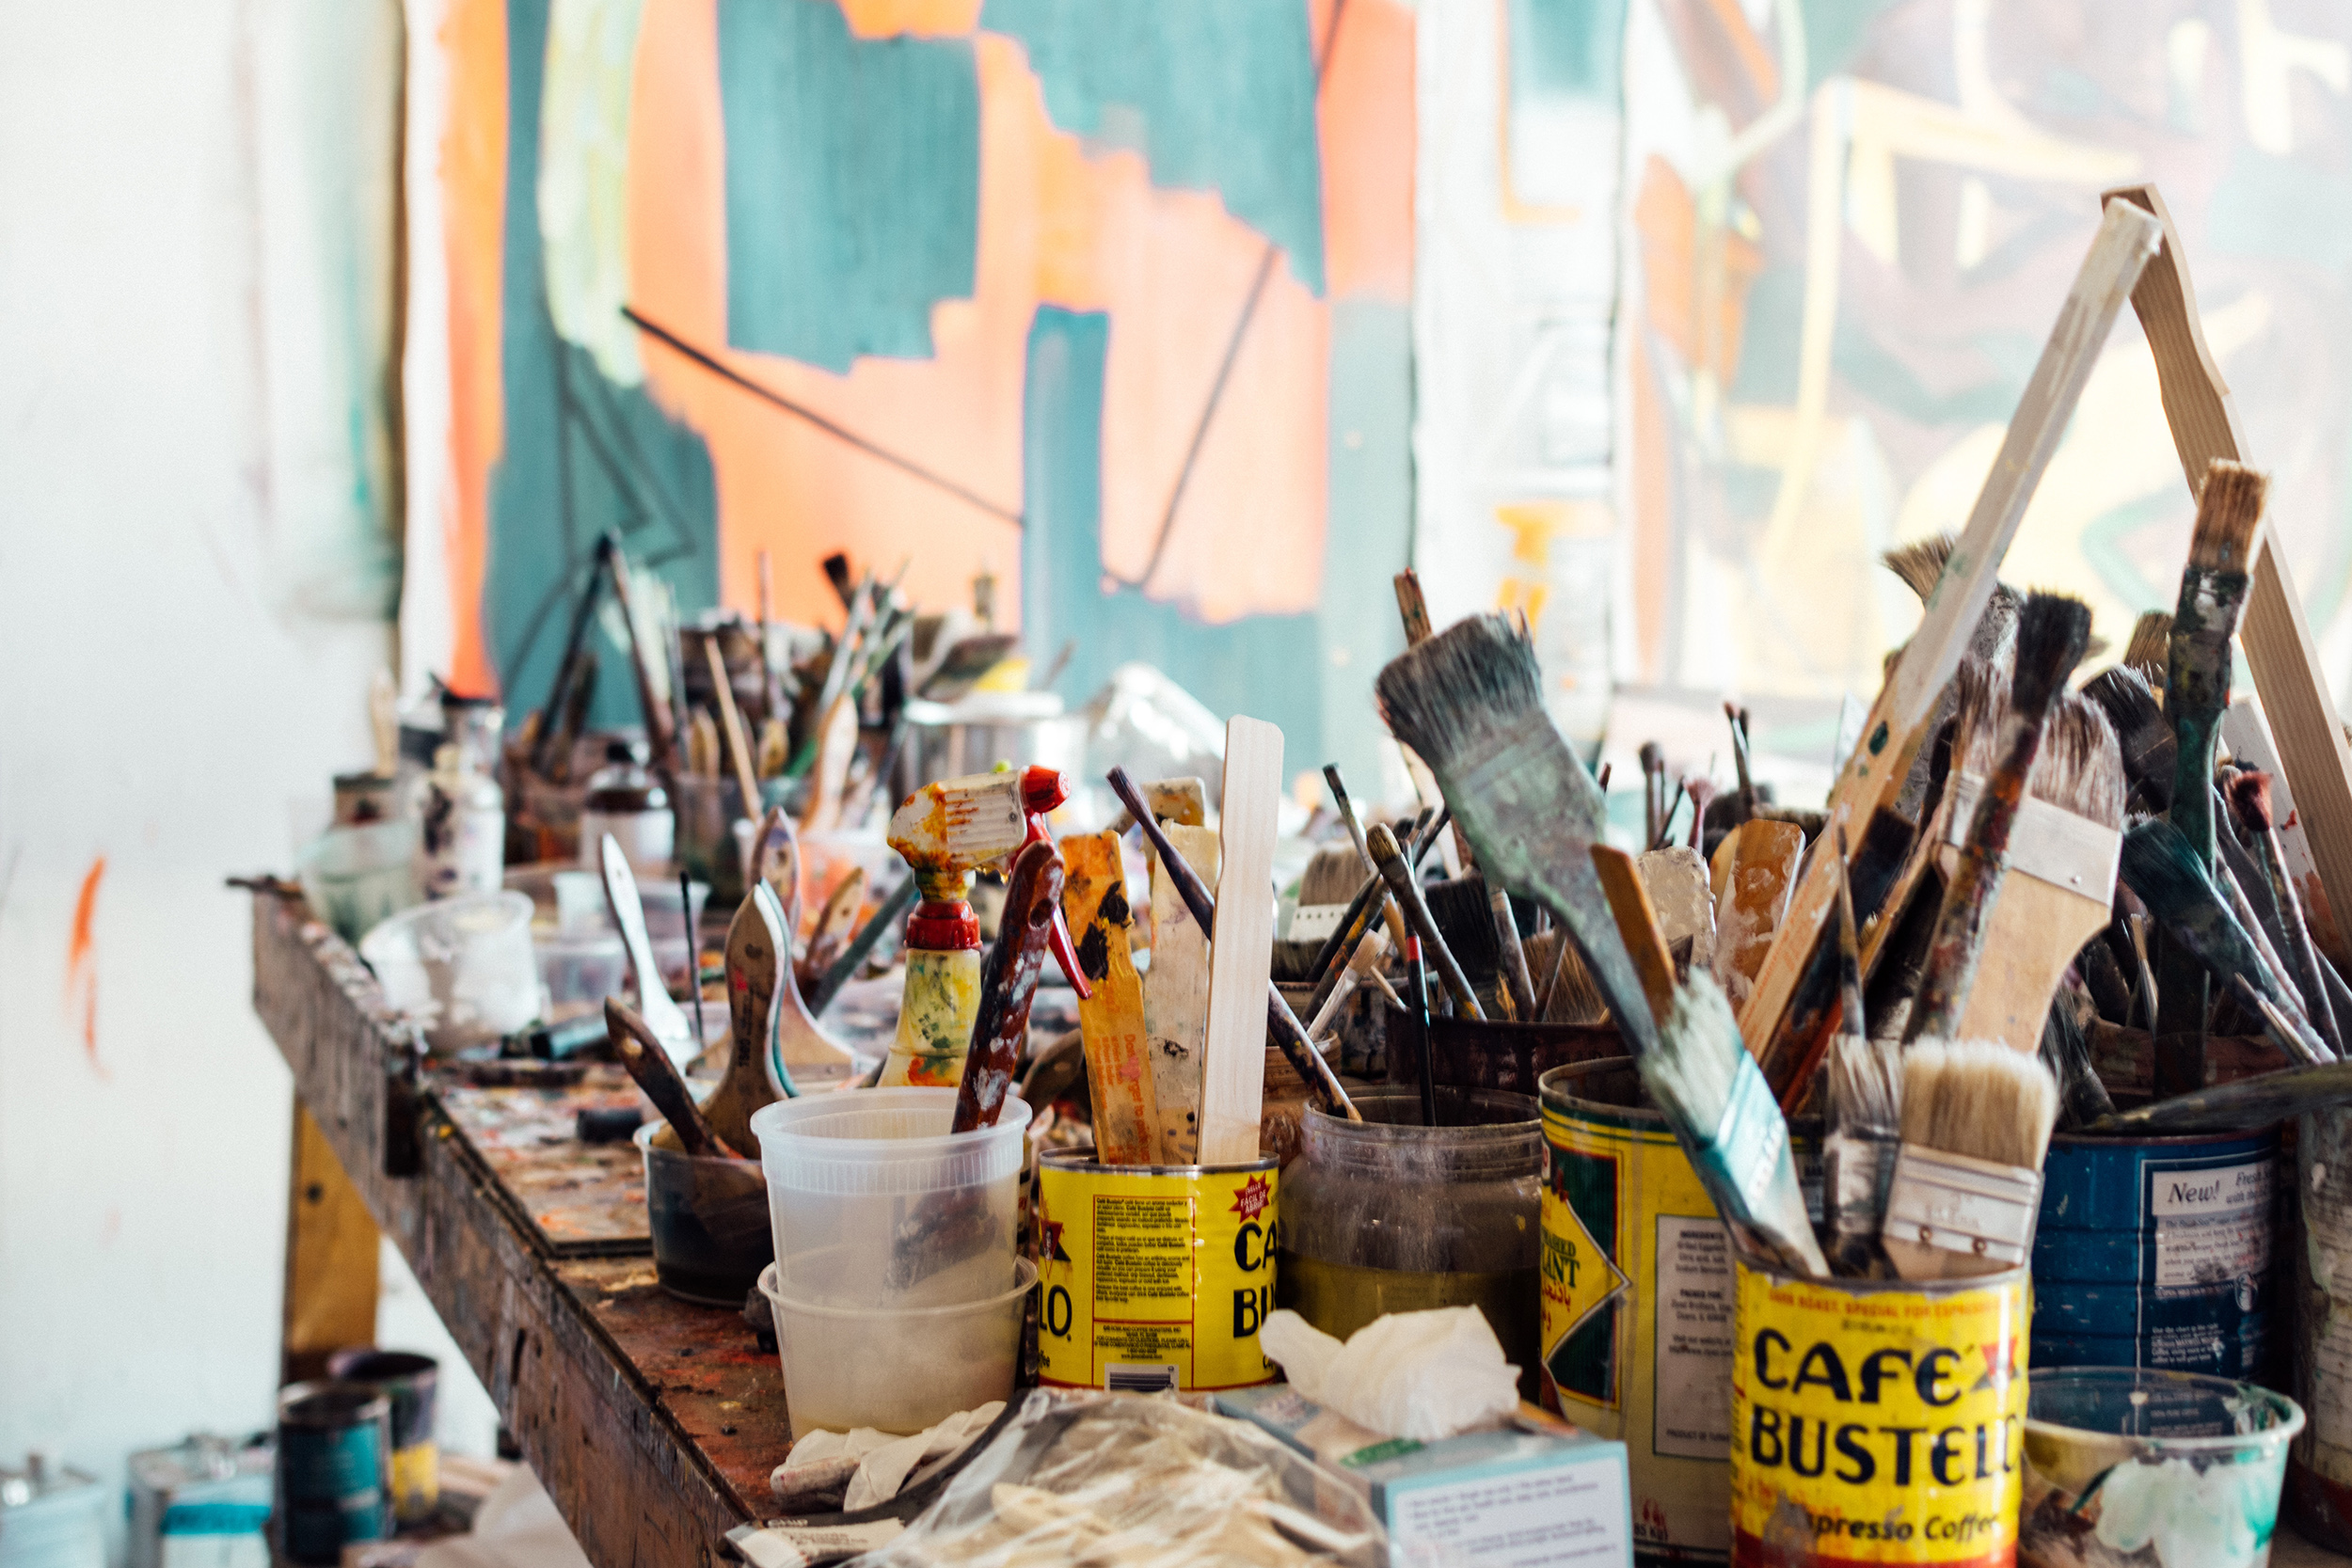  A view of the art workshop studio in Italy 